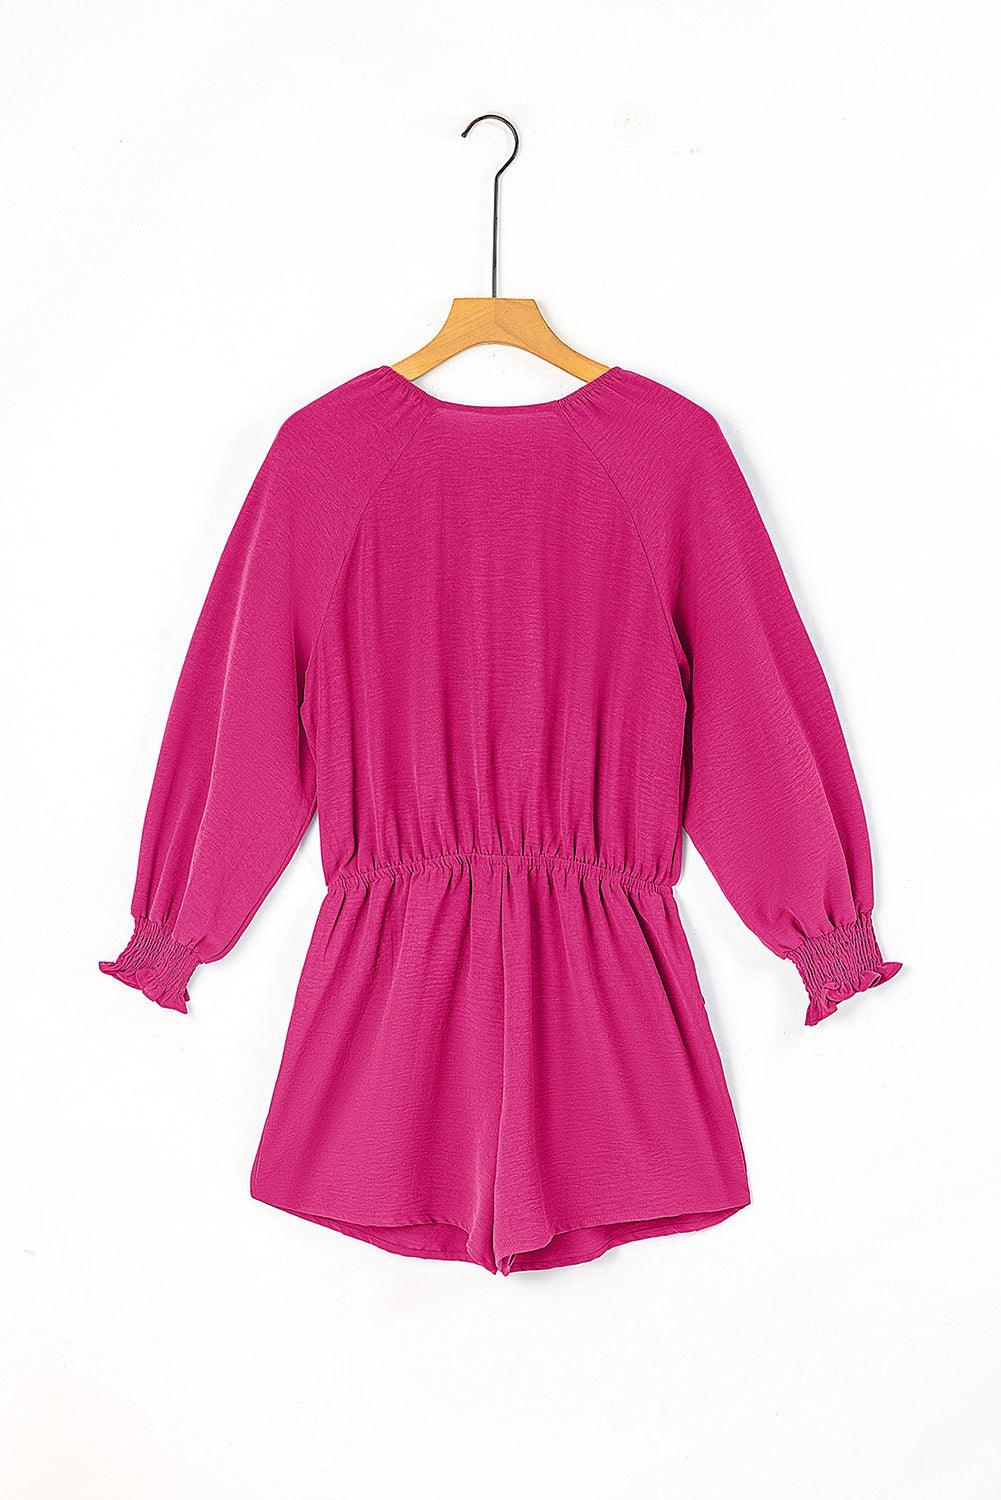 Tied Flounce Sleeve Plunge Romper - Lab Fashion, Home & Health